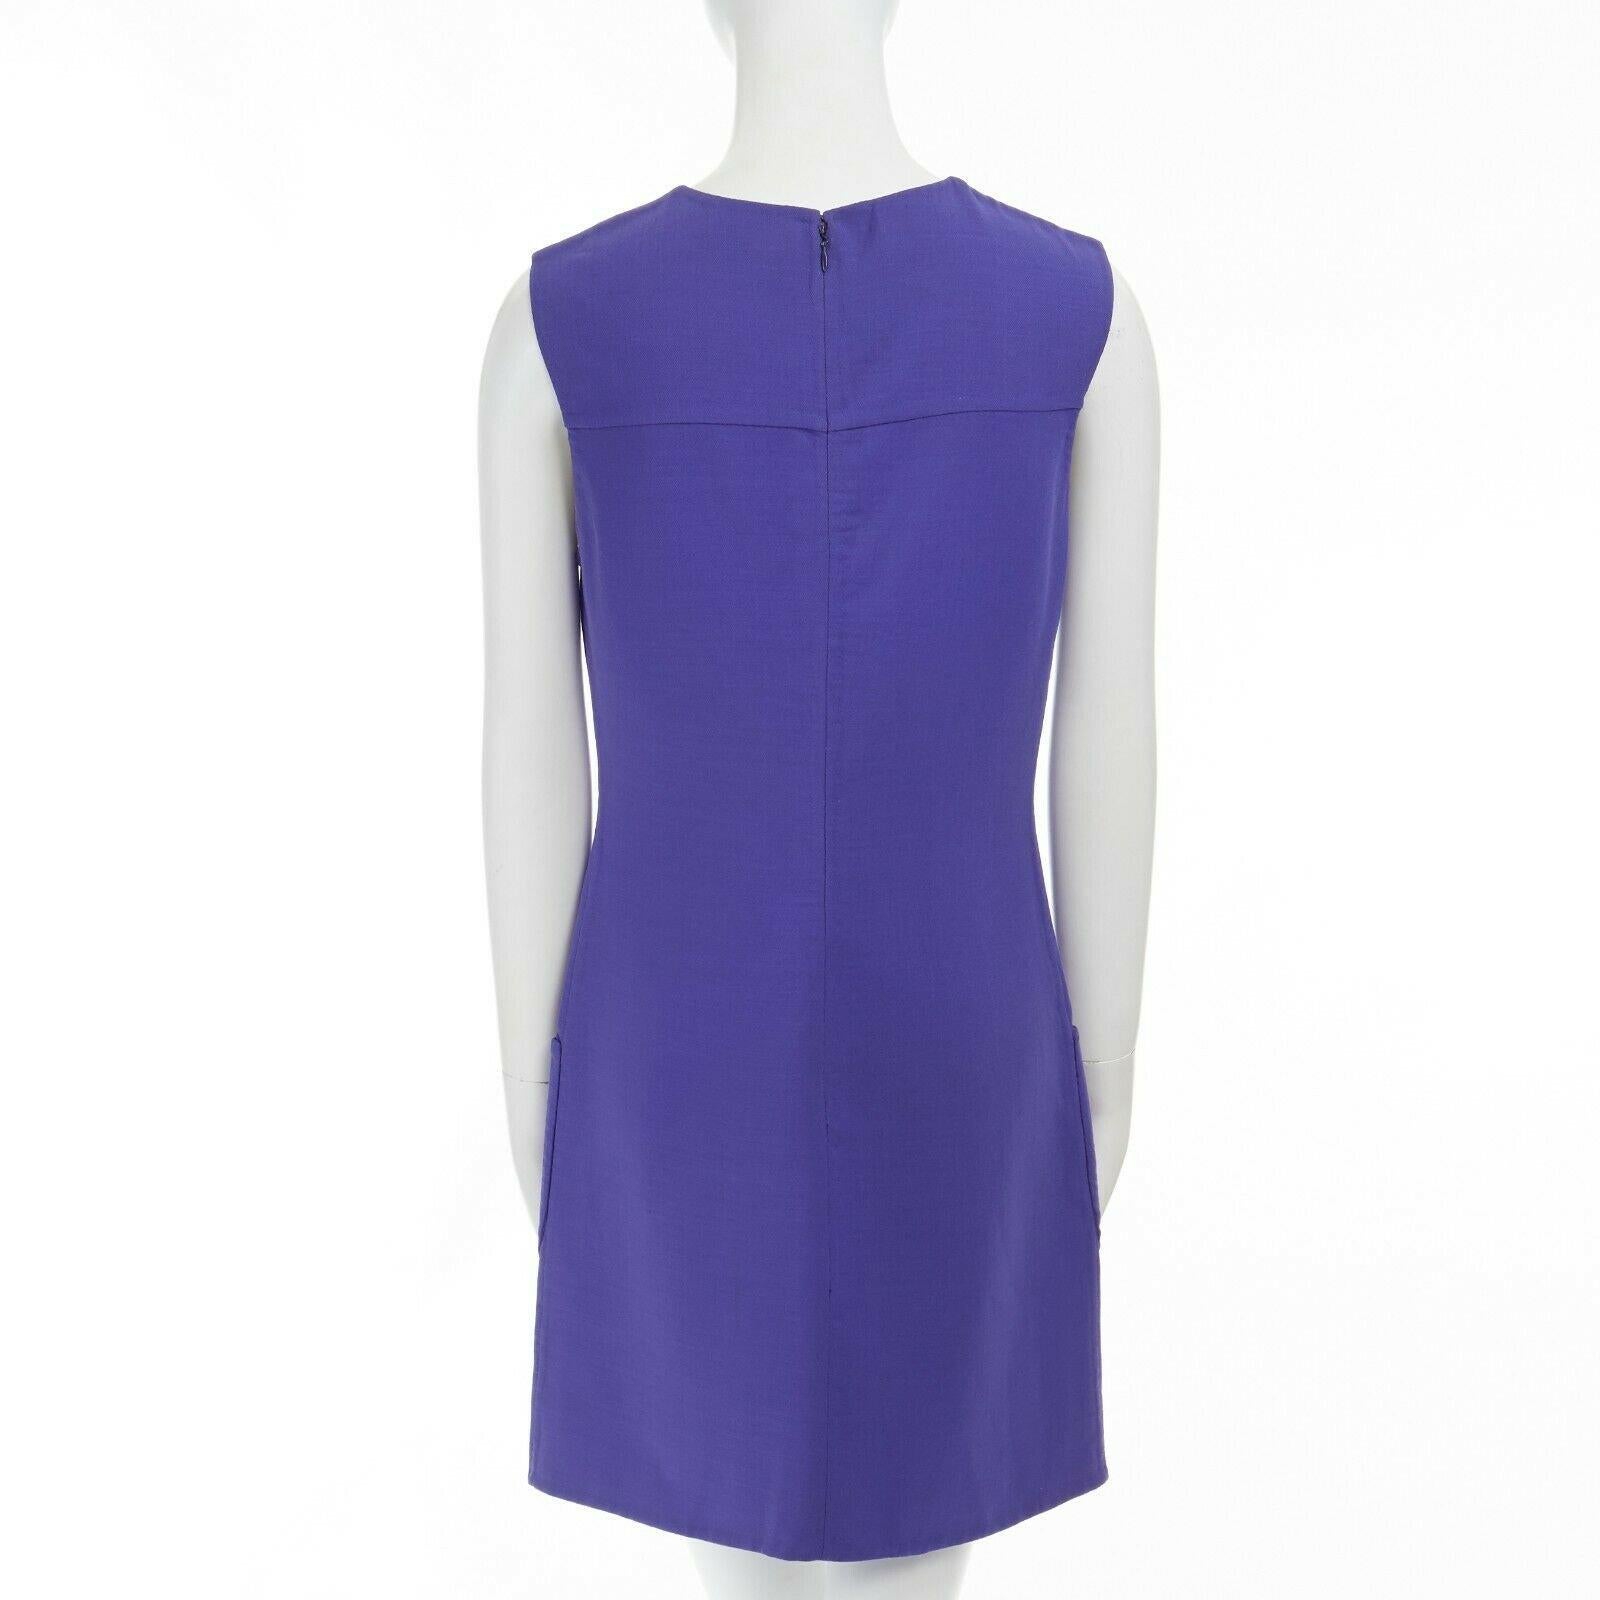 GIANNI VERSACE Vintage blue patch pocket sleeveless shift cocktail dress M Reference: TGAS/A02940 
Brand: Versace 
Designer: Donatella Versace 
Color: Blue 
Pattern: Solid 
Closure: Zip 
Extra Detail: Muted cobalt blue. Mid weight fabric. Round